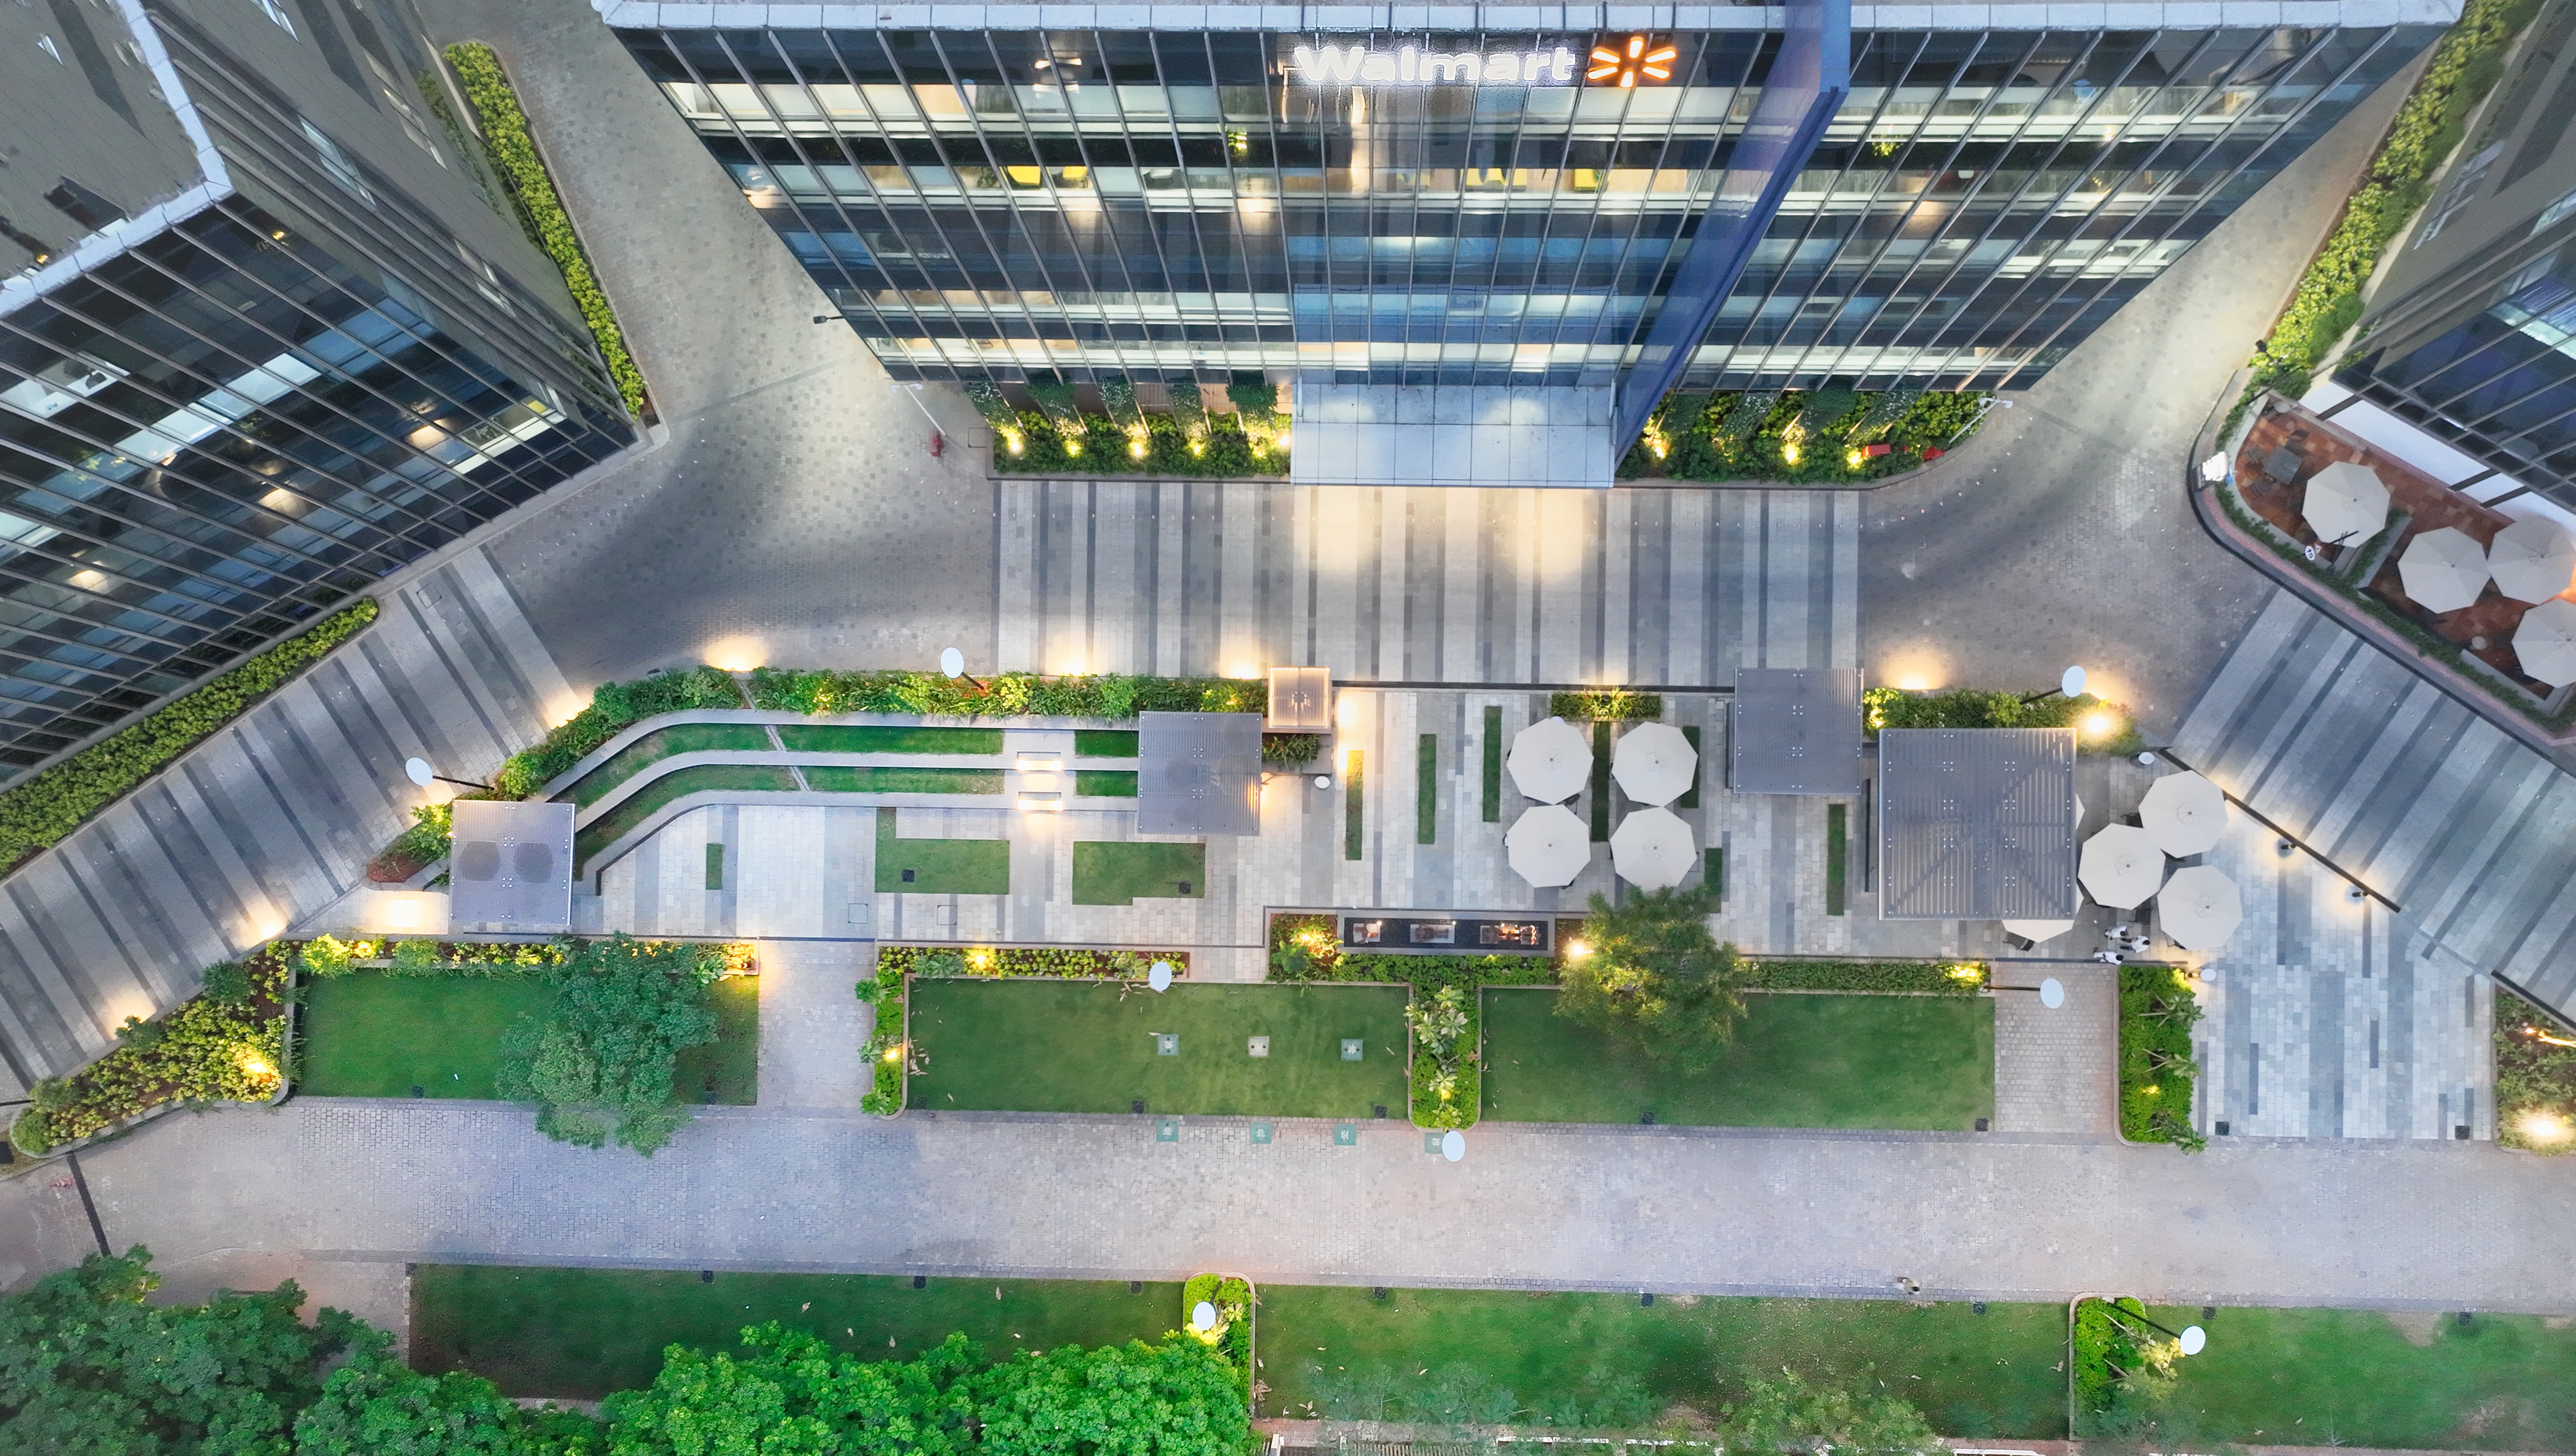 Bird's eye view of the courtyard and green space